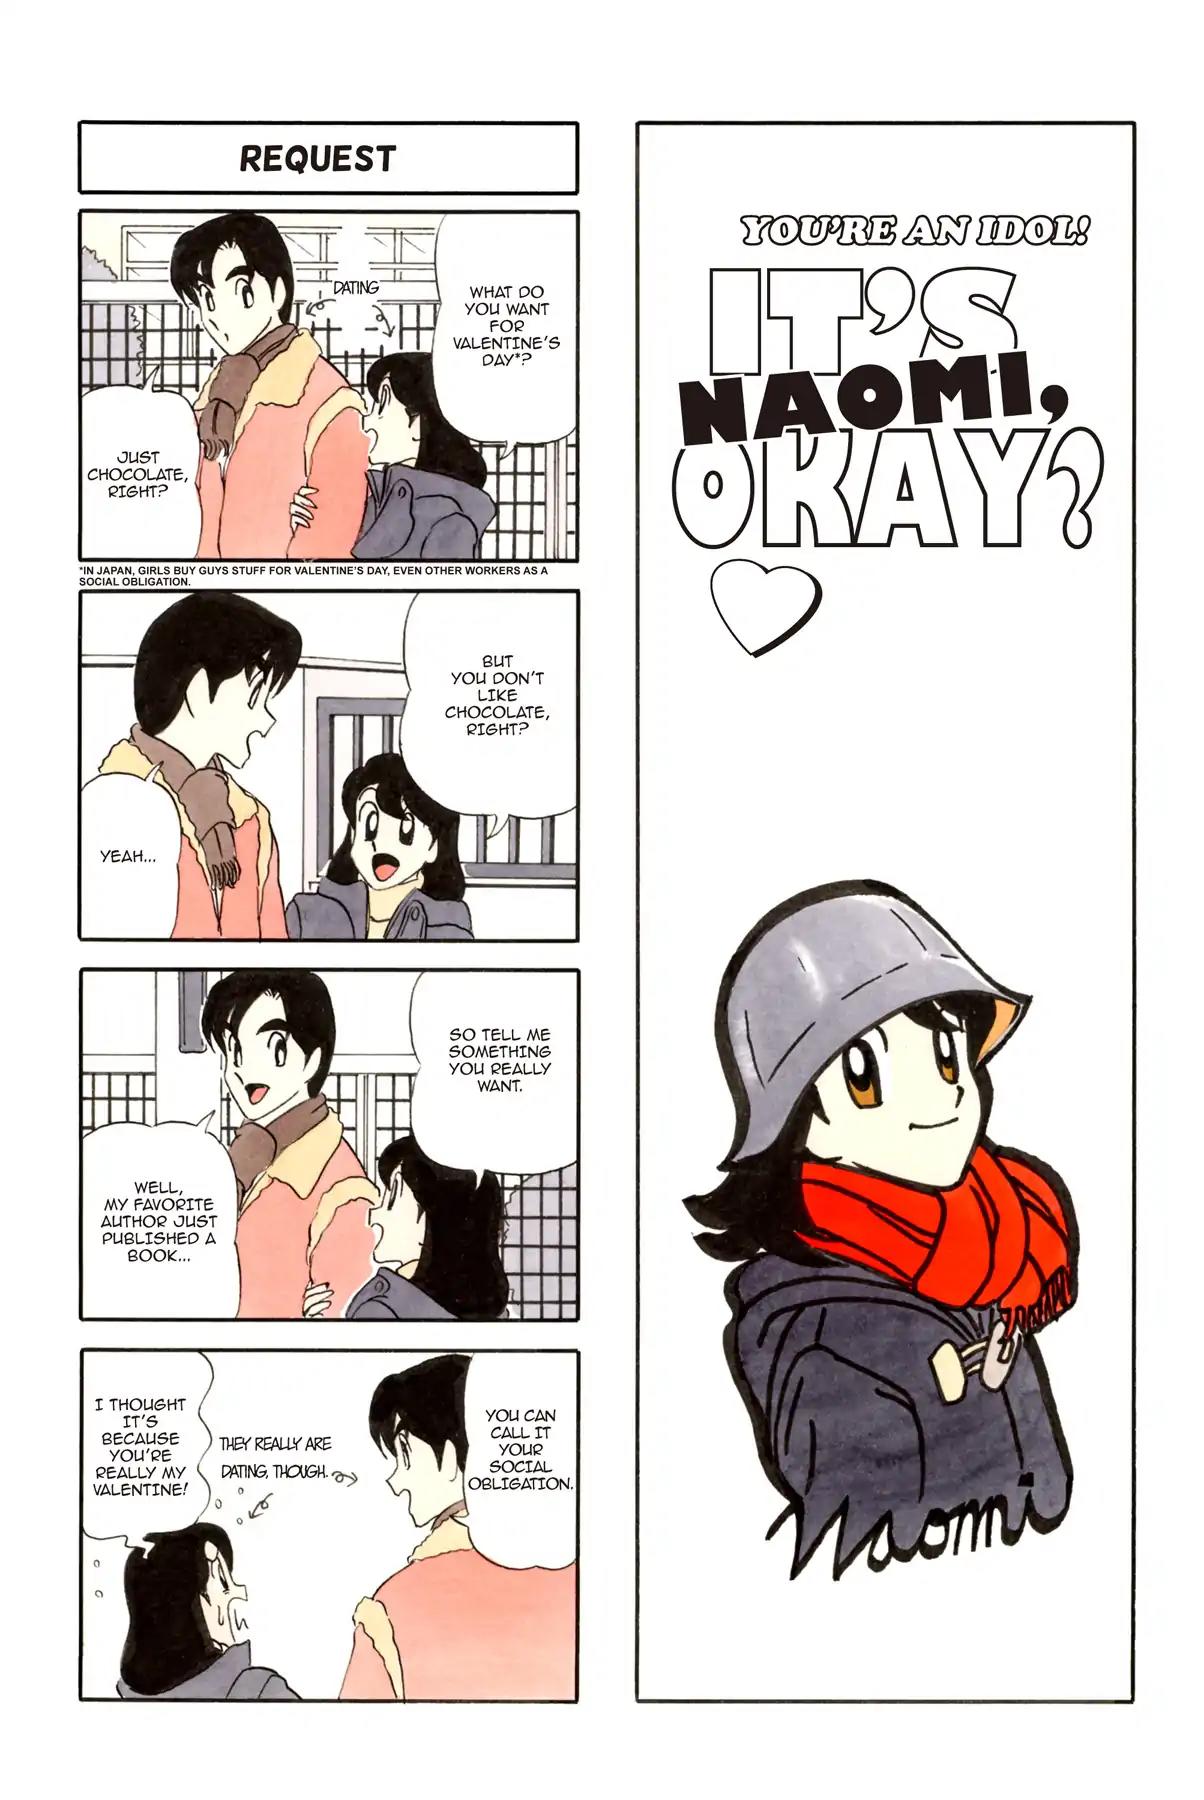 It's Naomi, Okay? After 16 Vol 1 Chapter 8